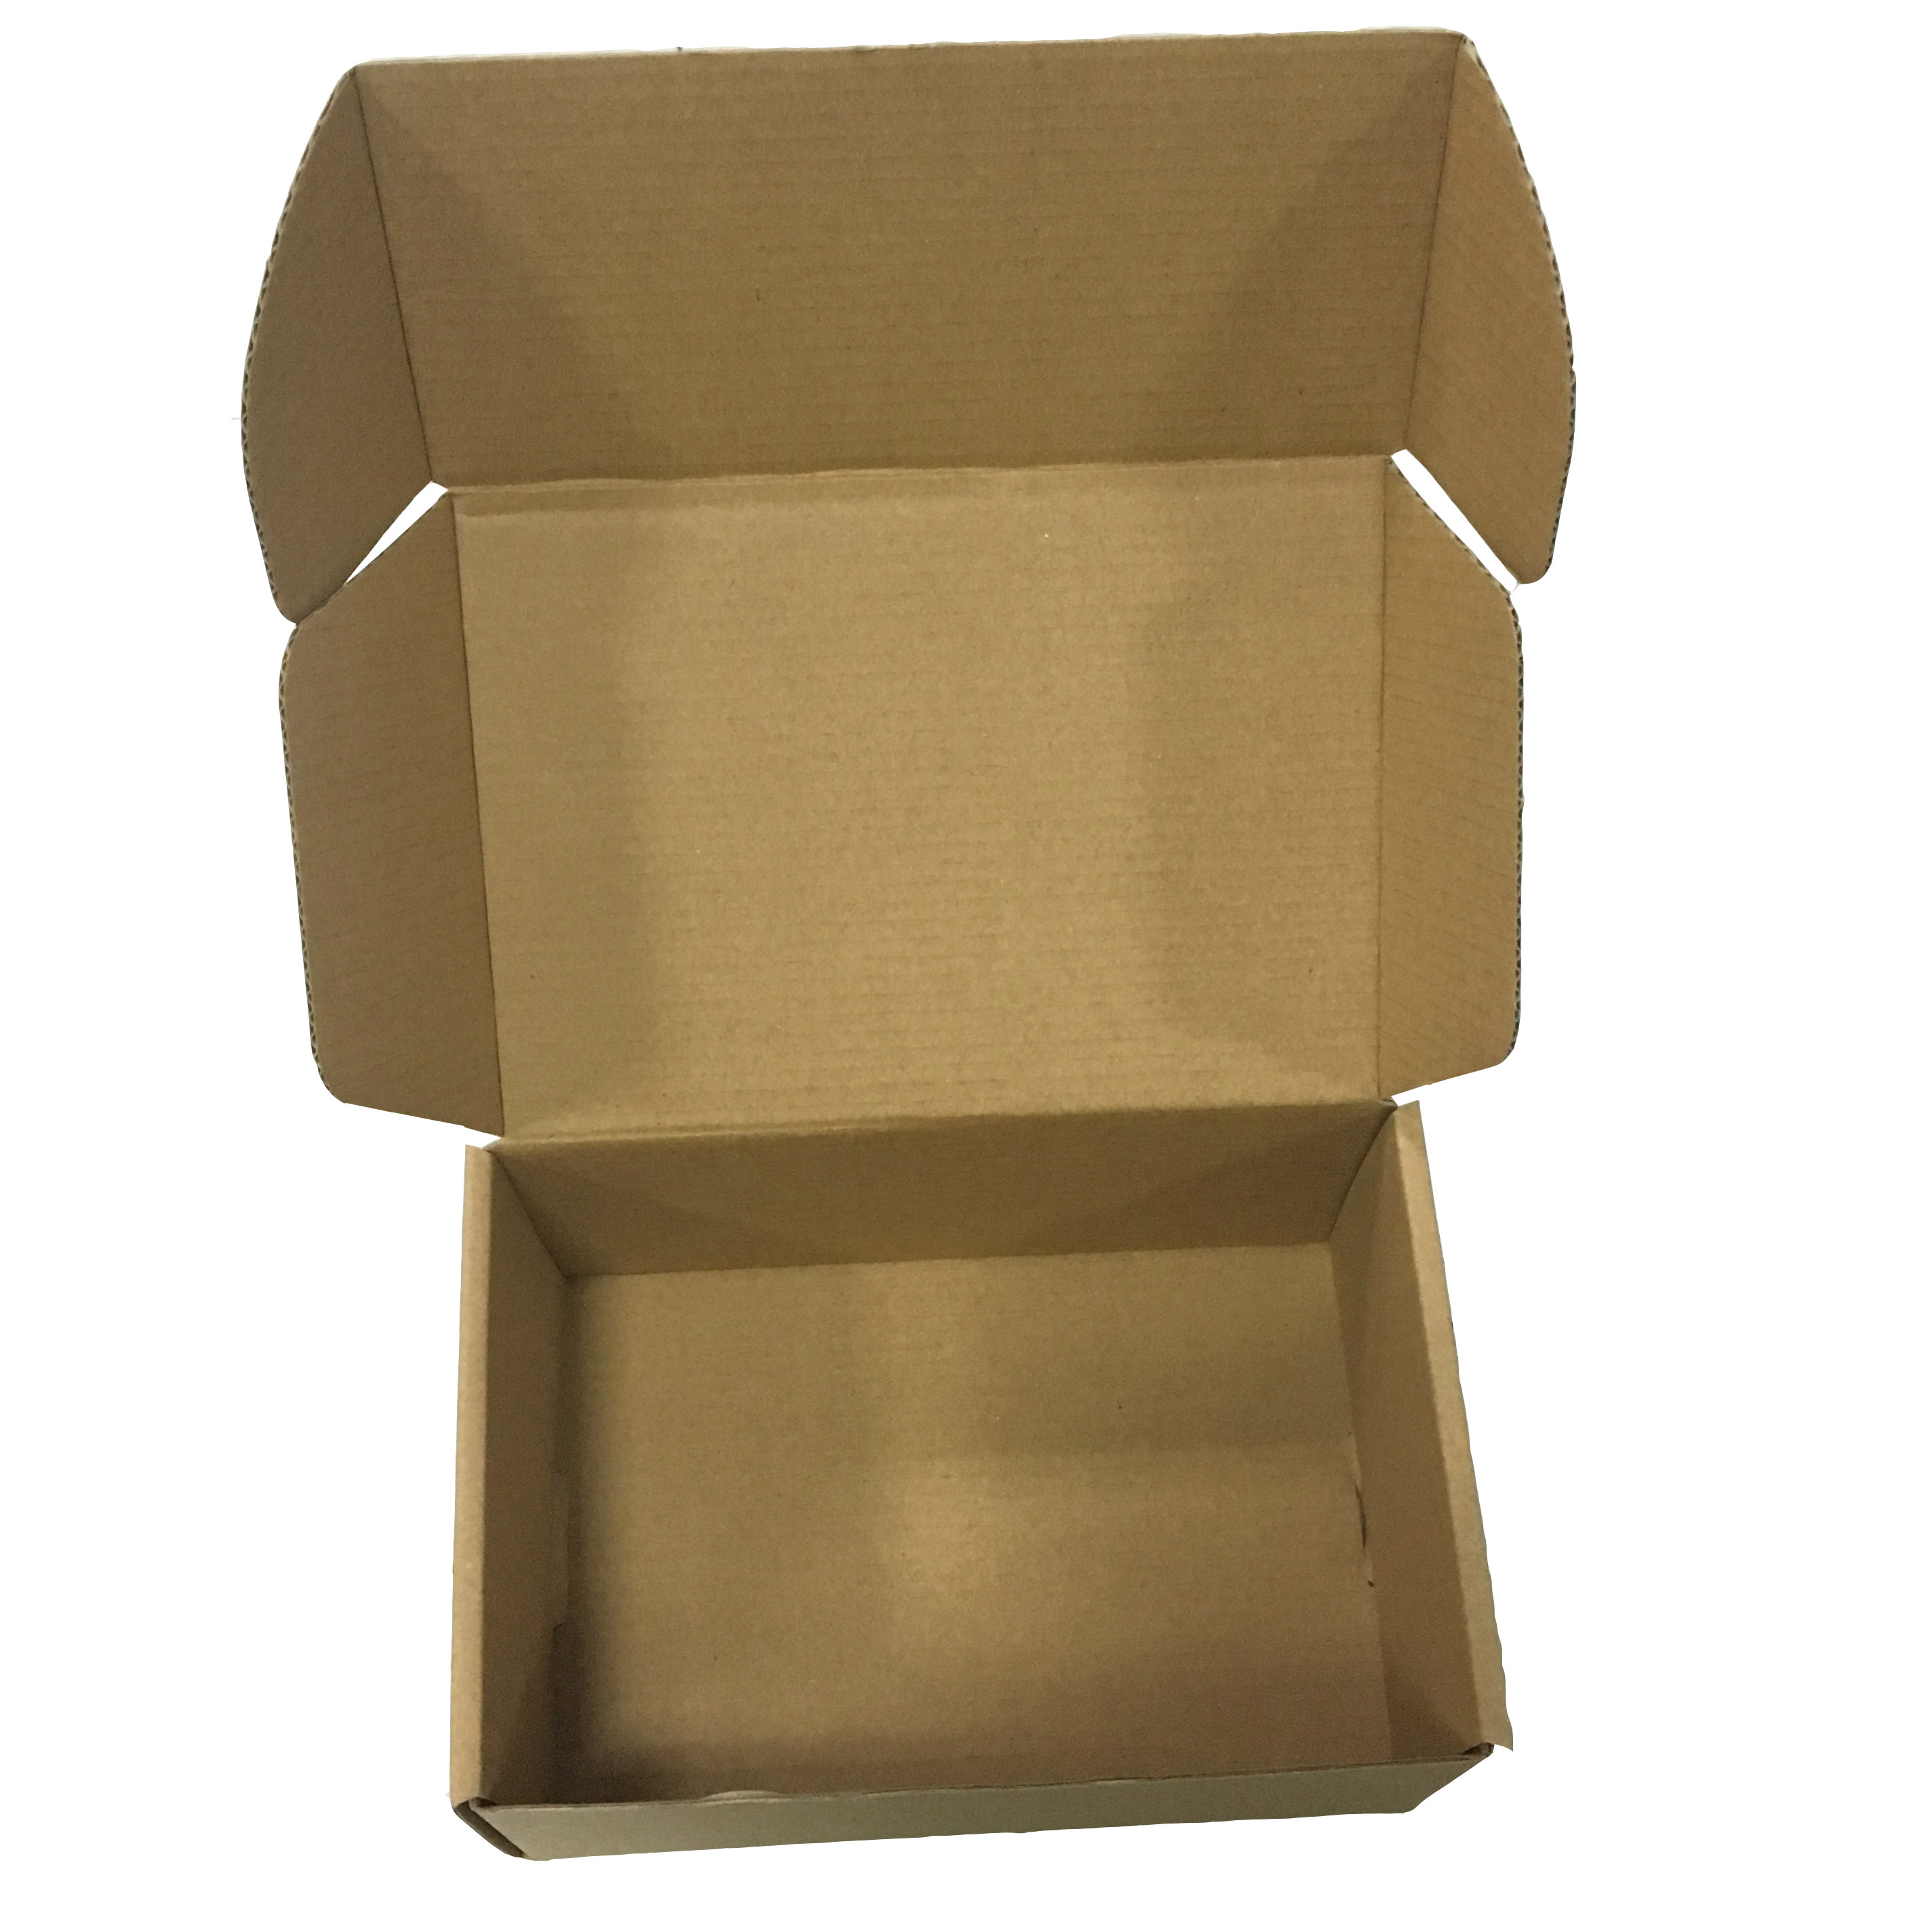 Cardboard Recycled Paper Box